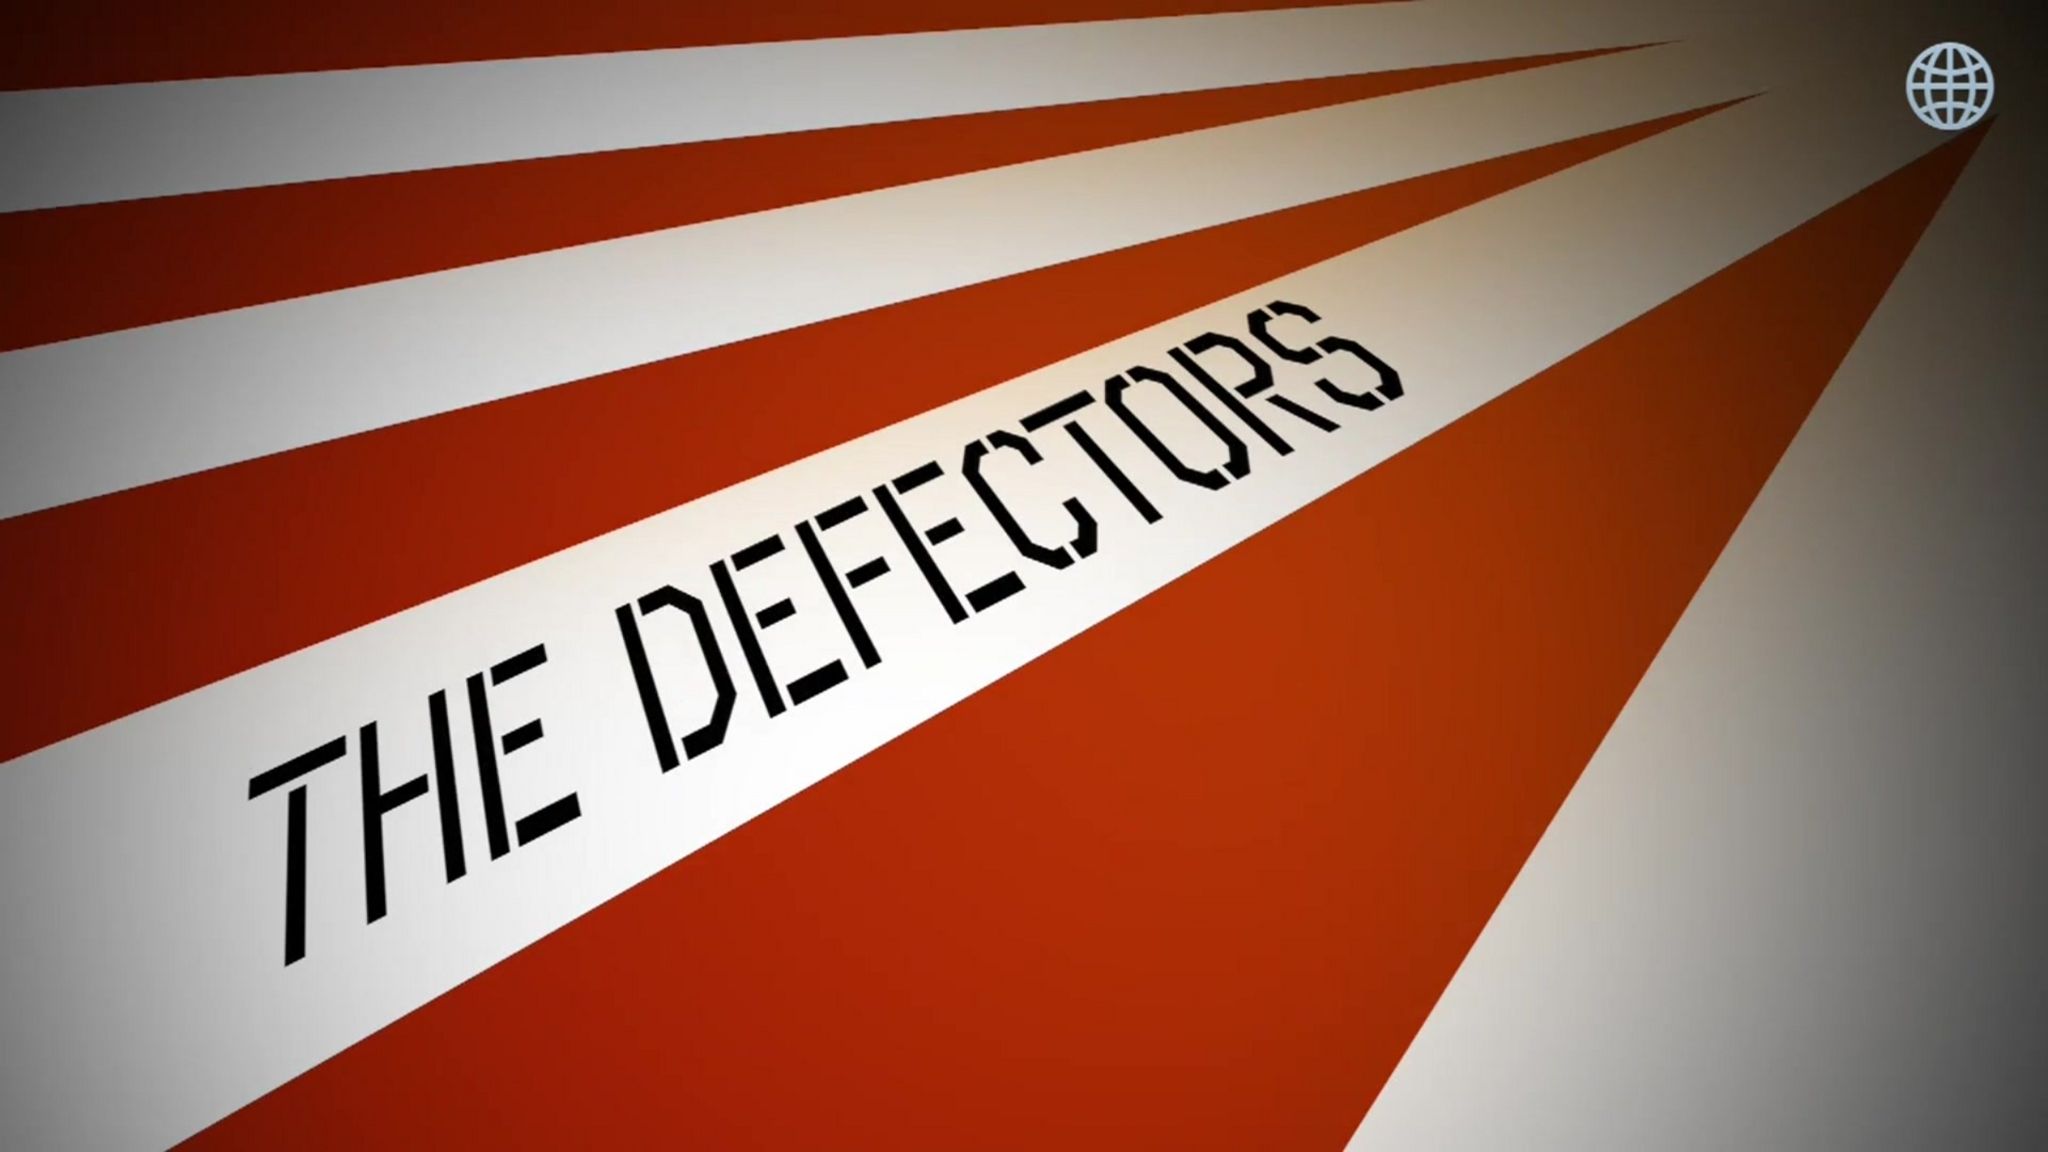 Sign which reads "The defectors"